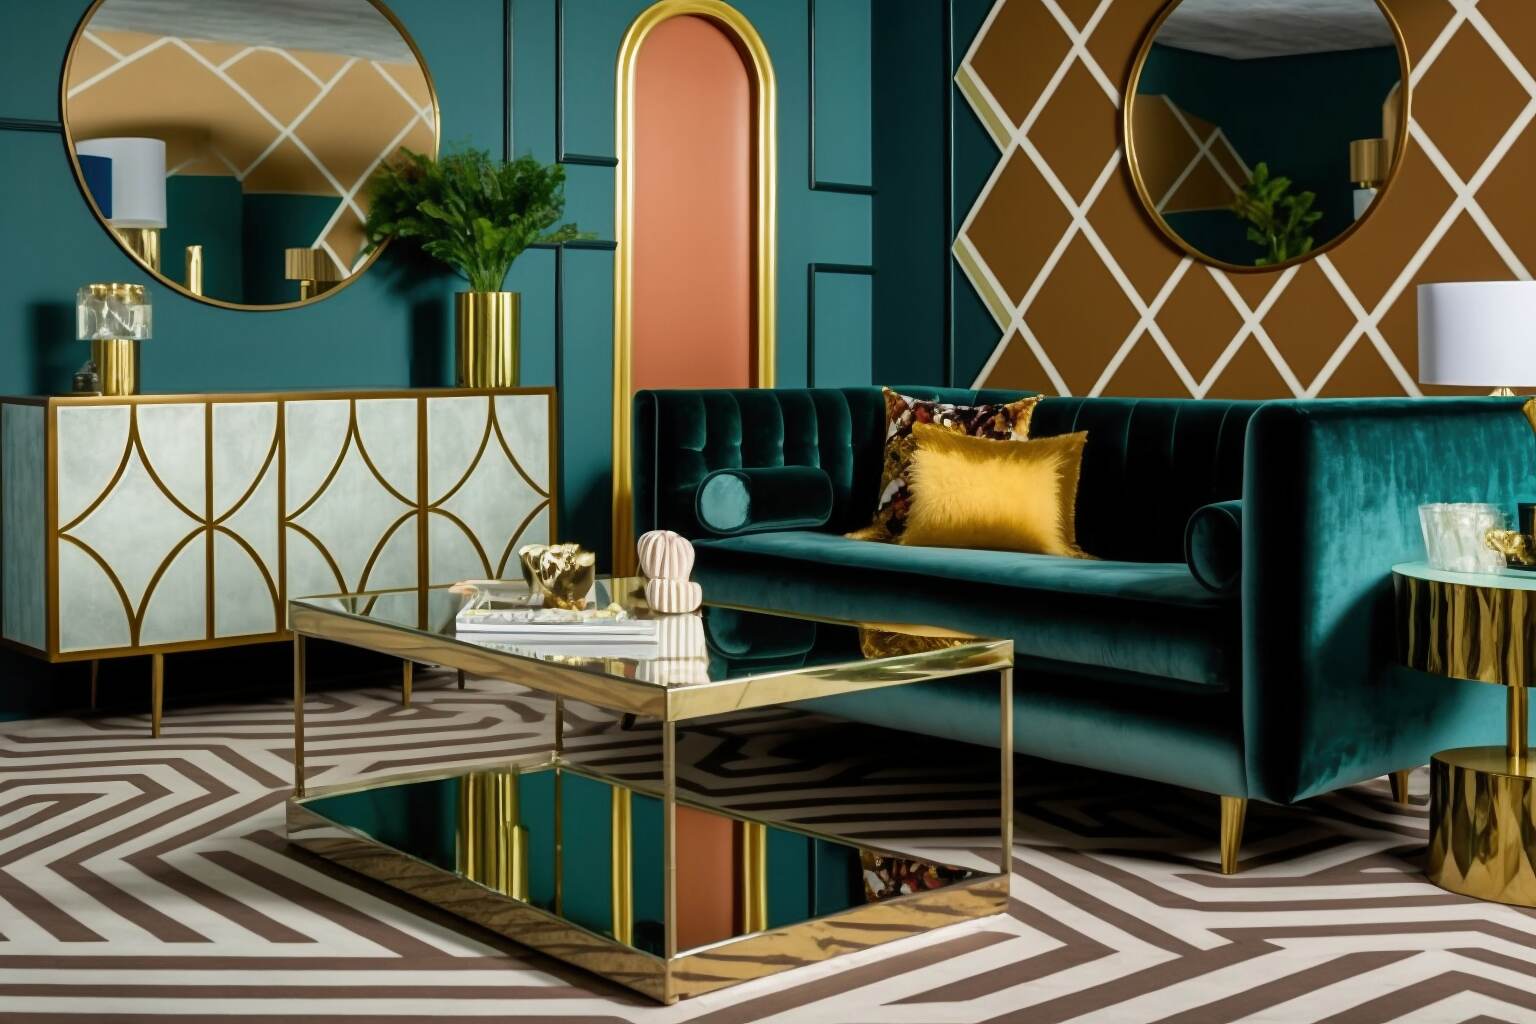 A Living Room With Art Deco Inspired Design